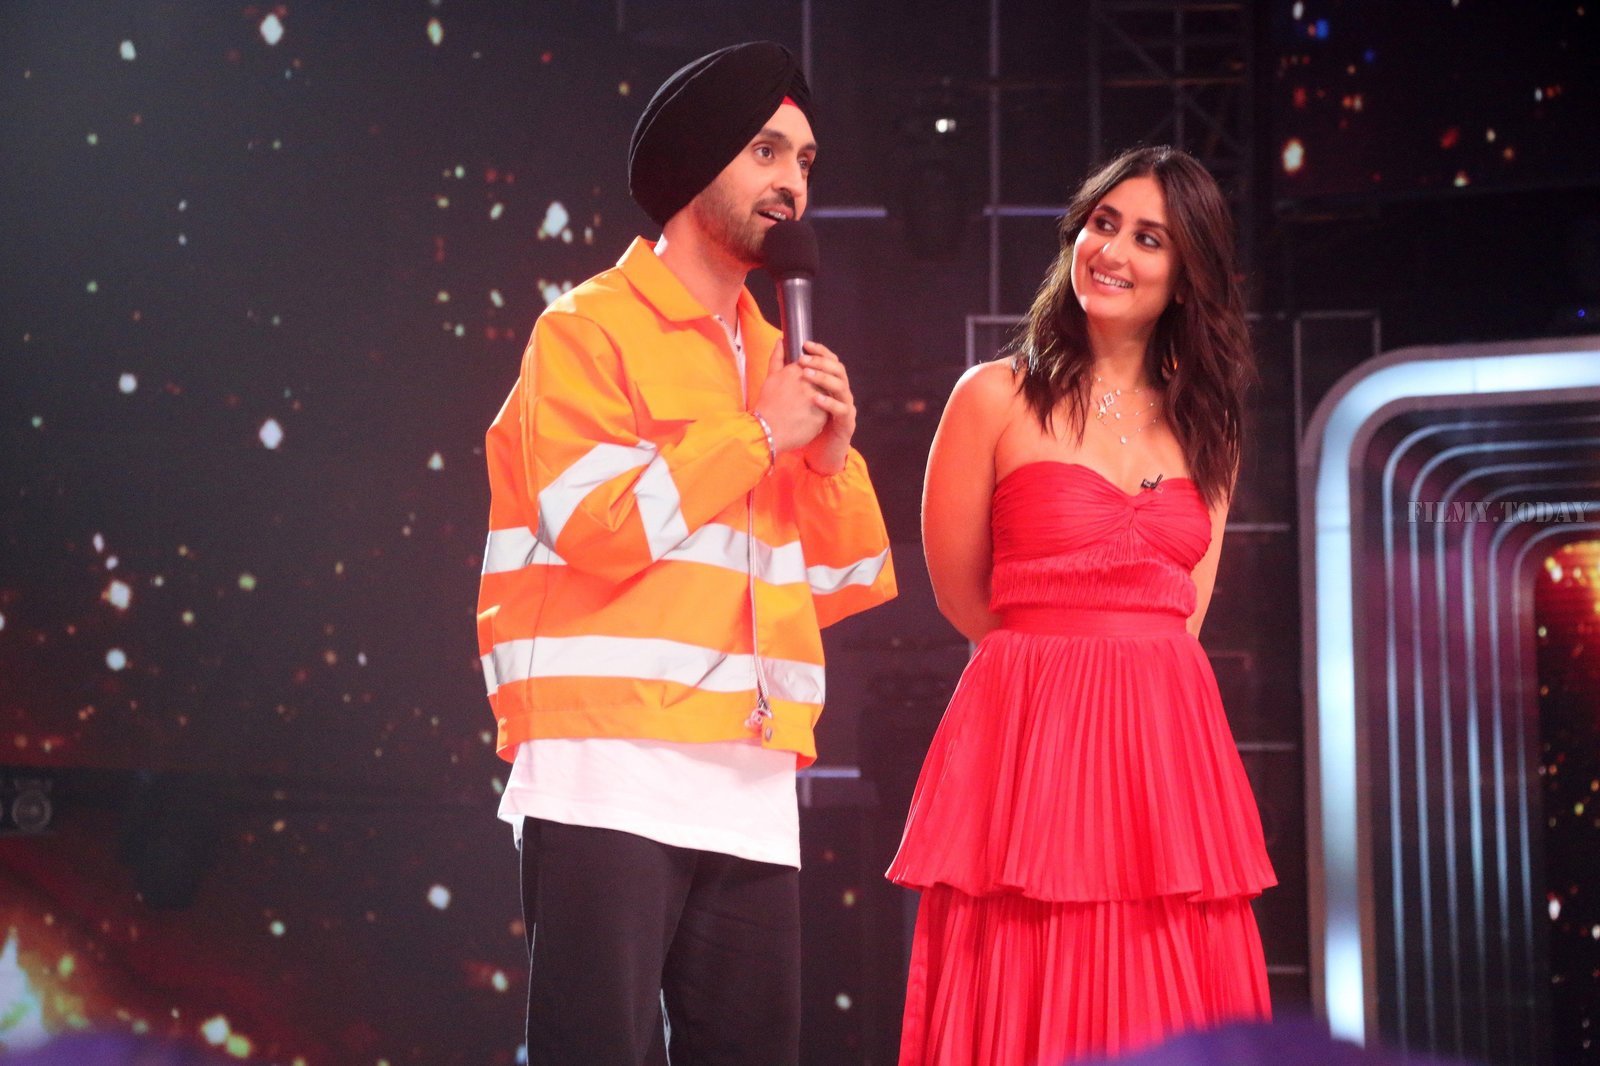 Photos: Promotion Of Film Arjun Patiala On The Sets Of Dance India Dance | Picture 1663585